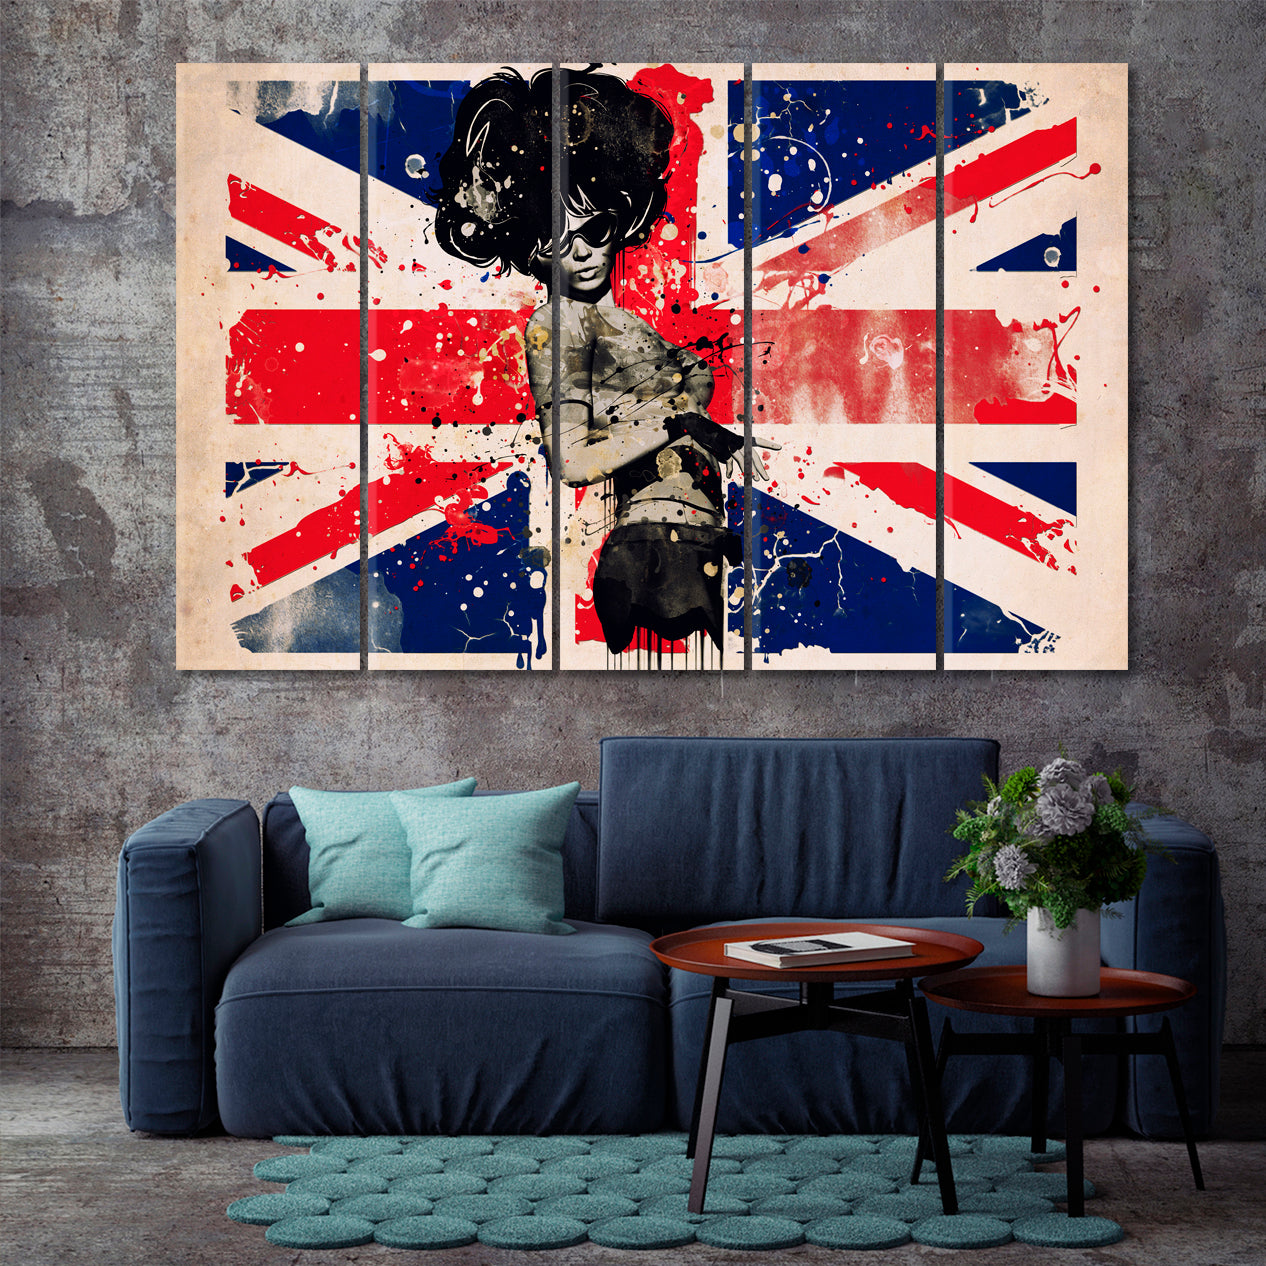 Fashion Woman British Flag Modern Grunge Style Posters, Flags Giclee Print Artesty 5 panels 36" x 24" 